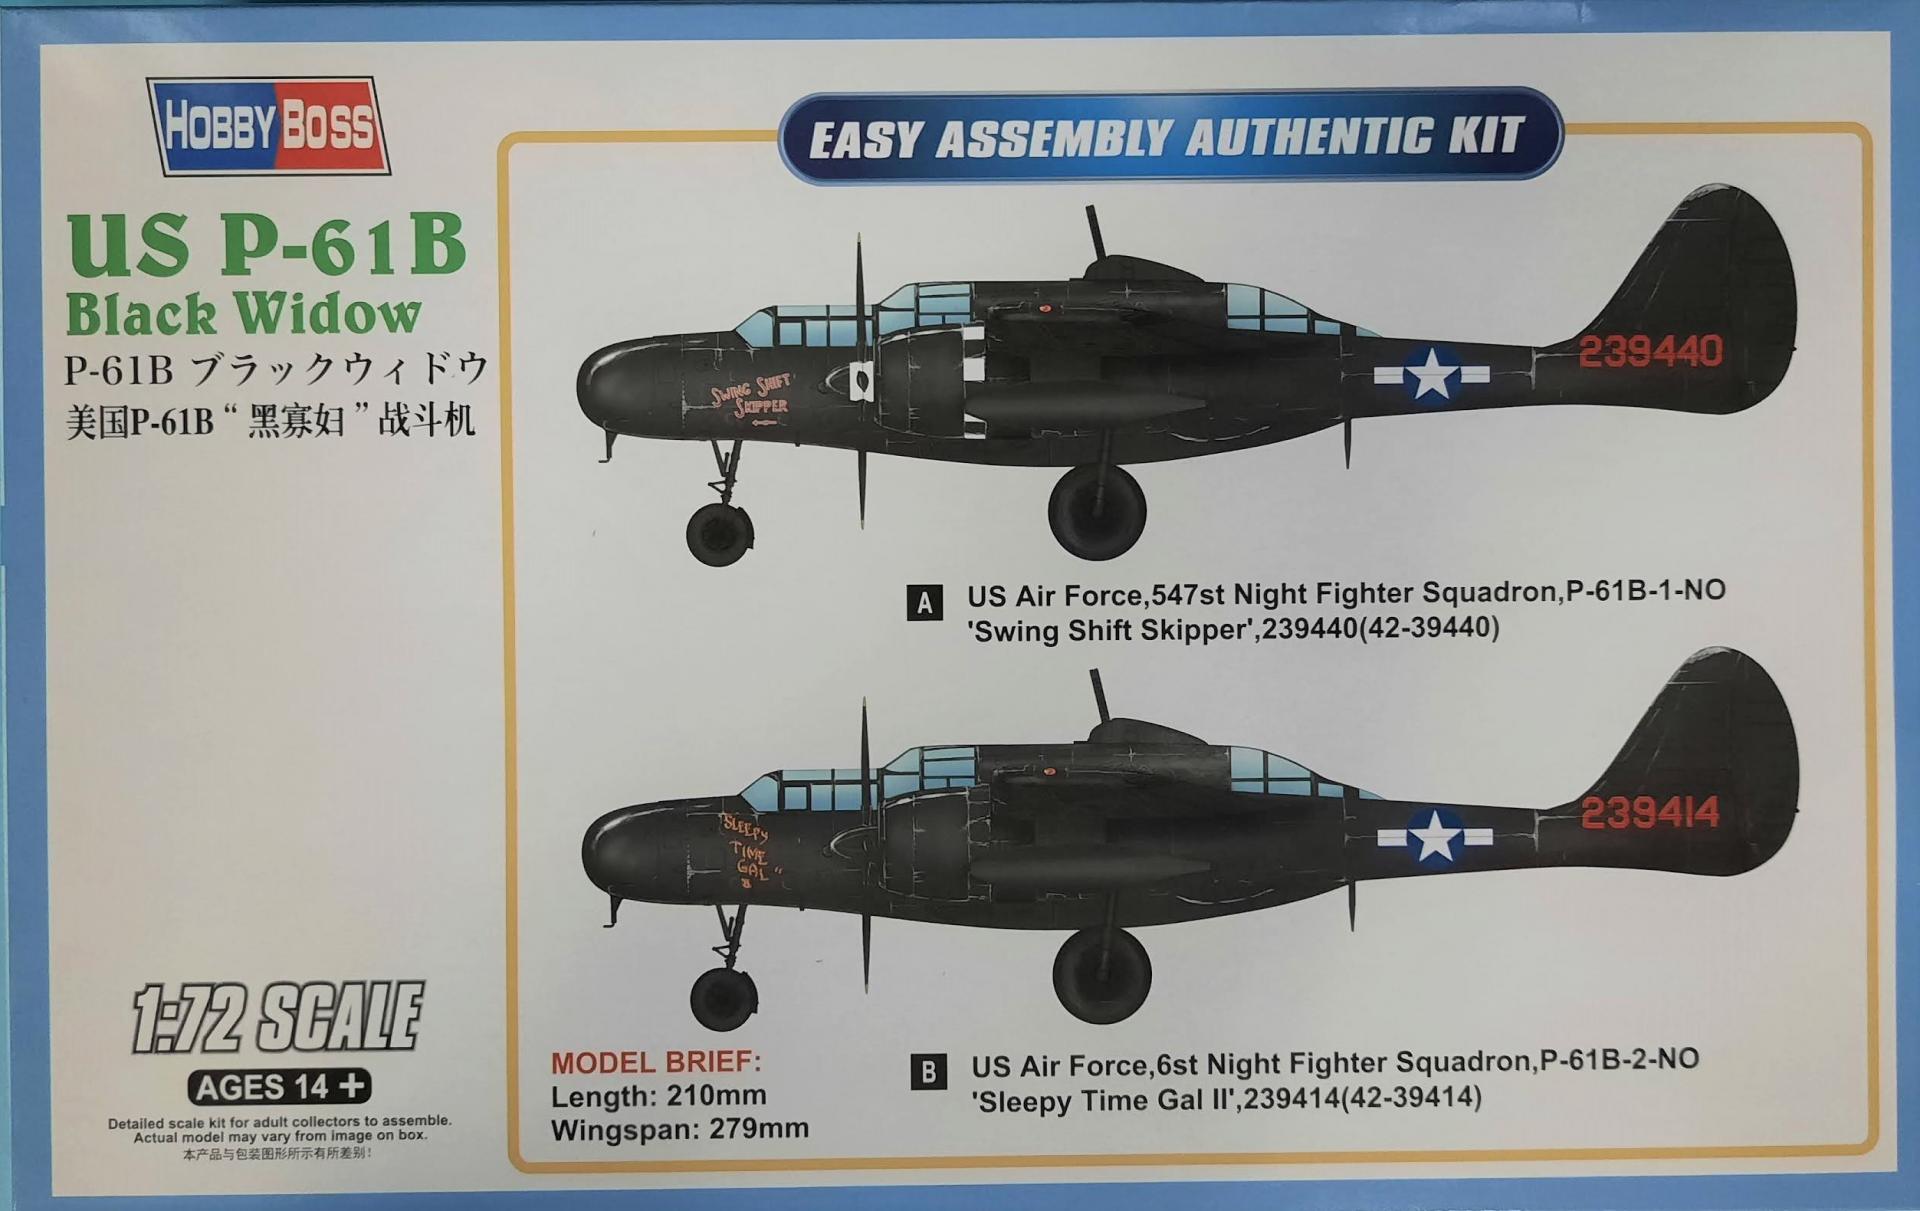 1/72 US P-61 B Black Widow. Easy Assembly Authentic Kit